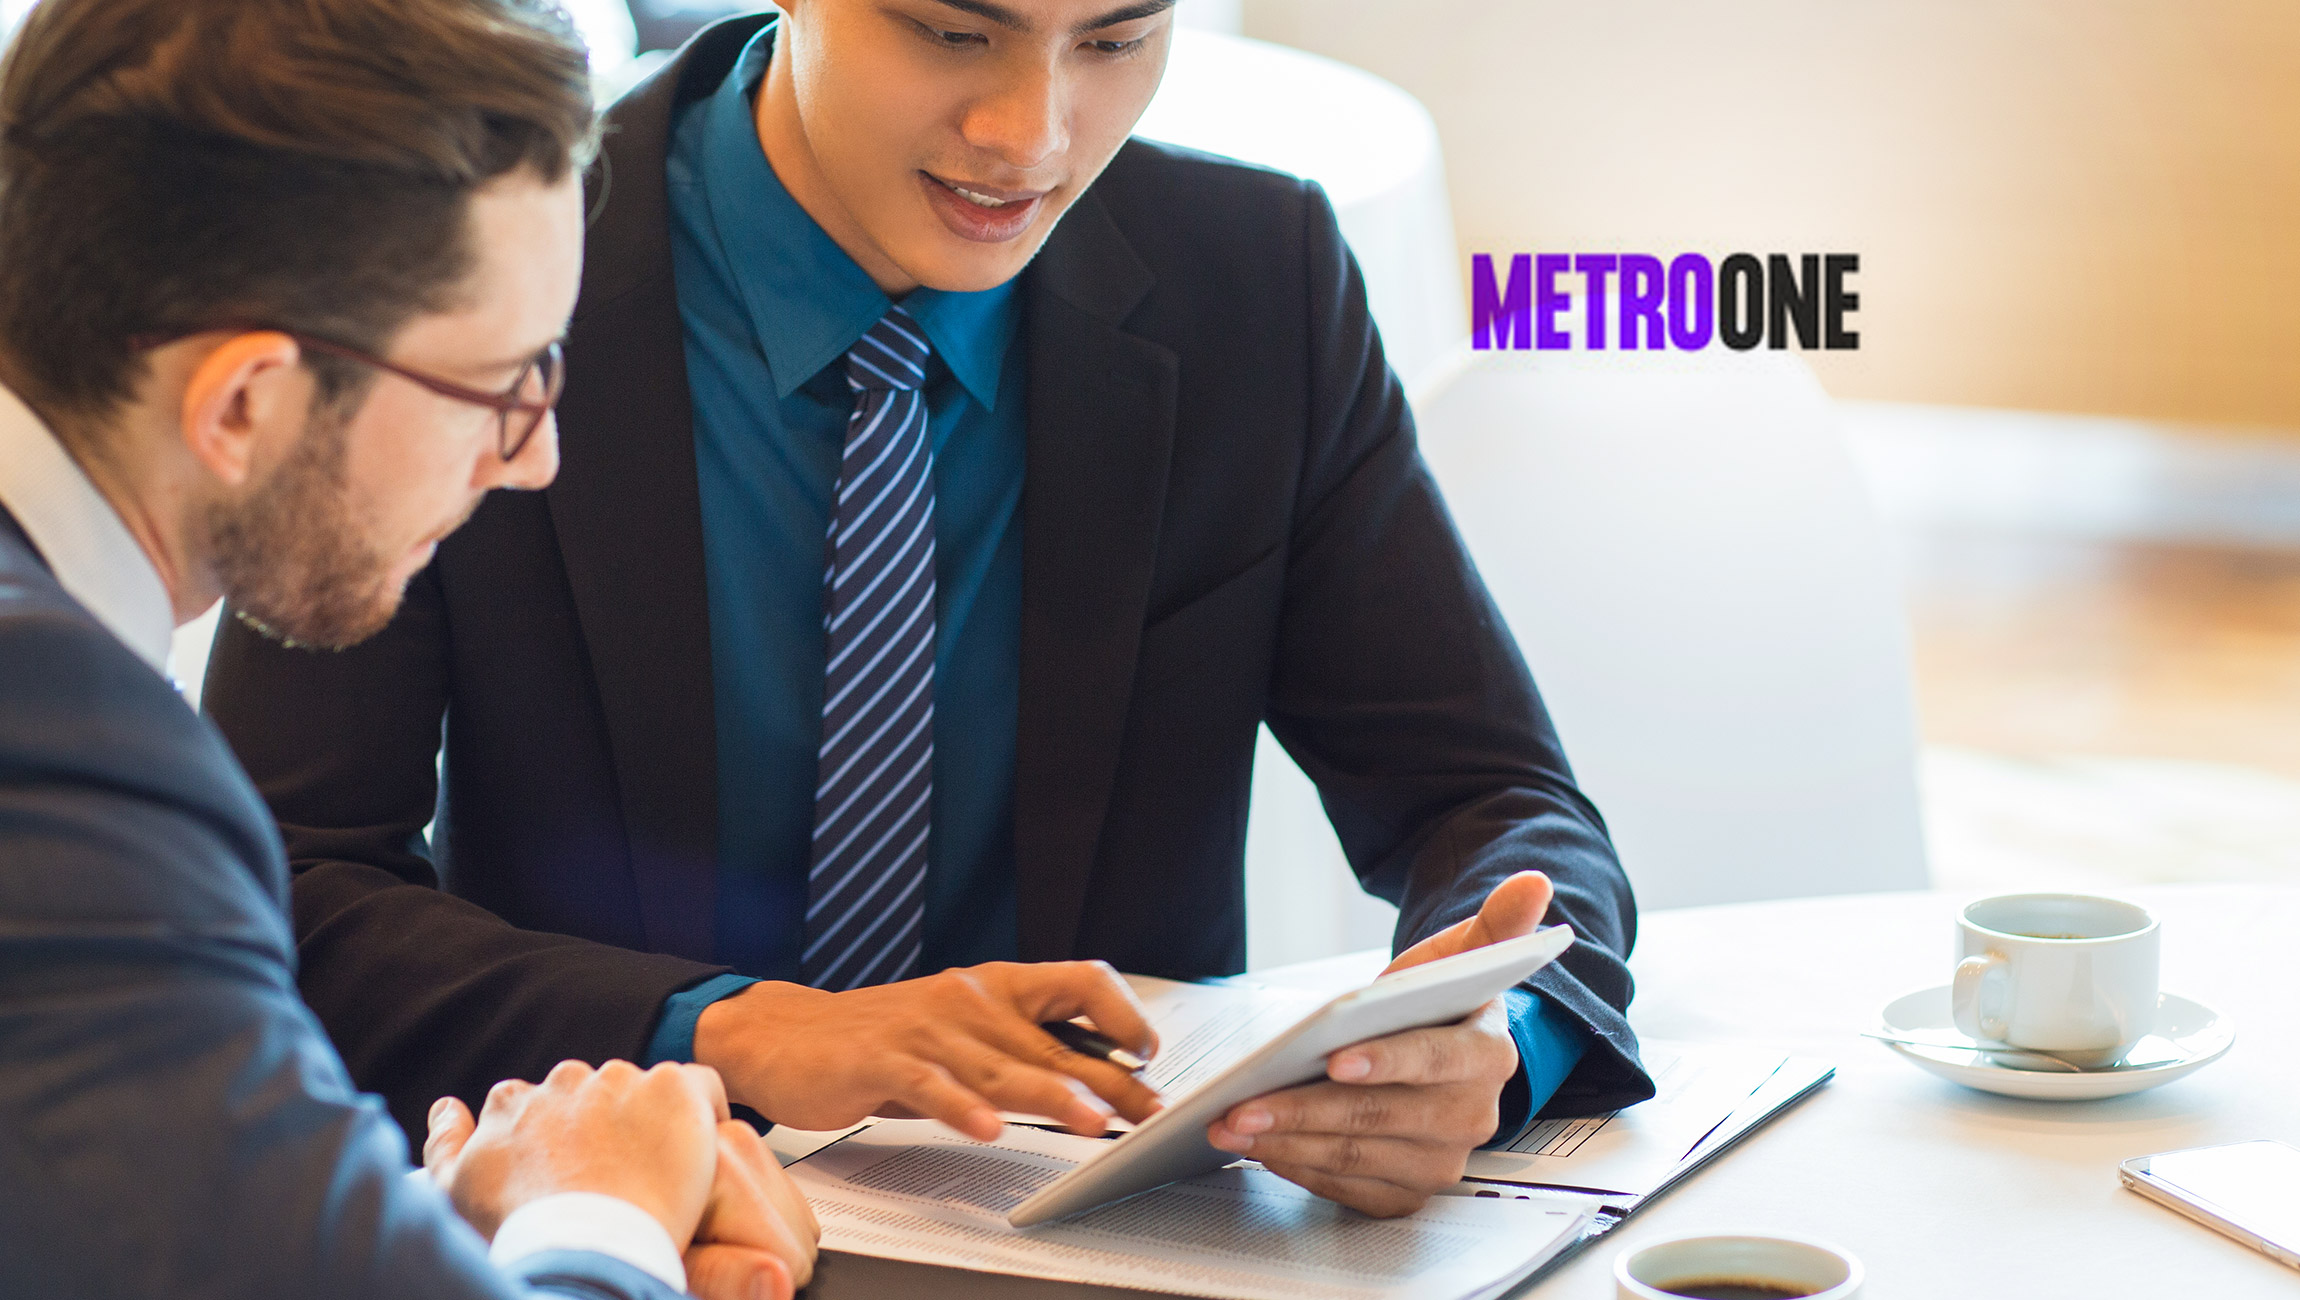 Metro-One-Telecommunications_-Inc.-Raises-_1.98-Million-in-PIPE-to-further-advance-its-transition-to-a-SaaS-based-mCommerce-Platform